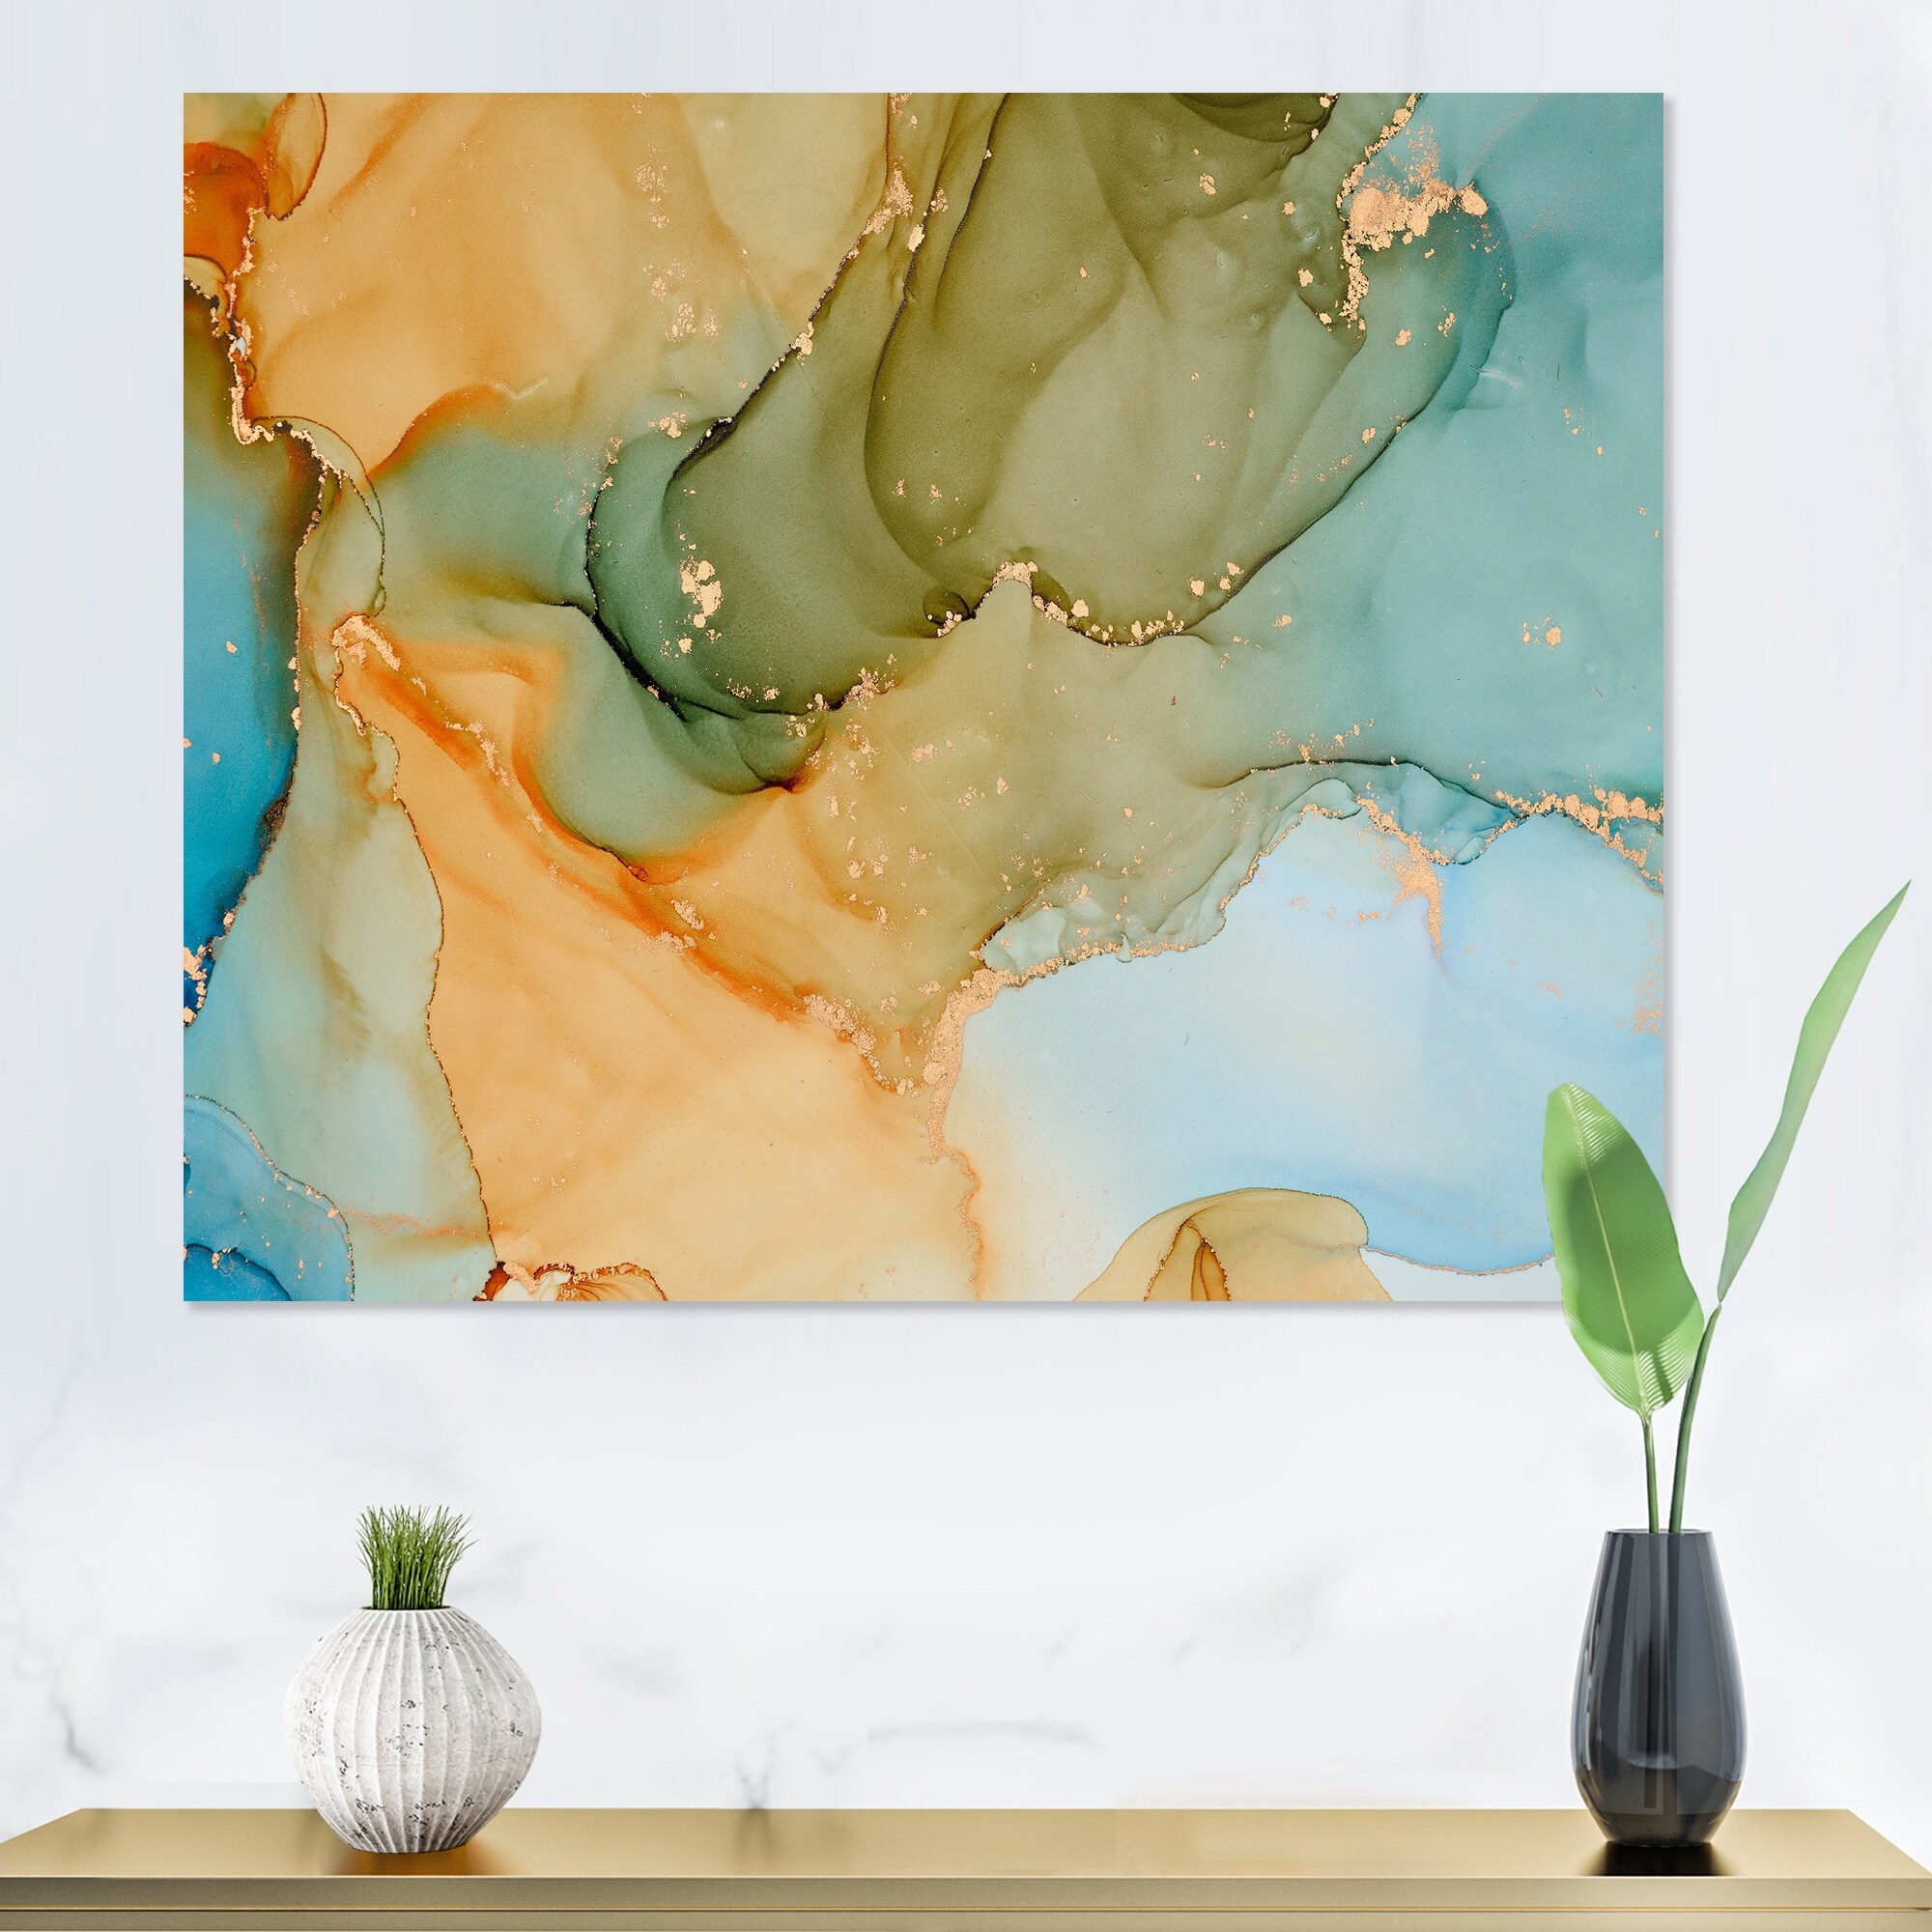 Fluid Painting Abstract Canvas Poster Wall Picture Modern Home Decor Unframed 